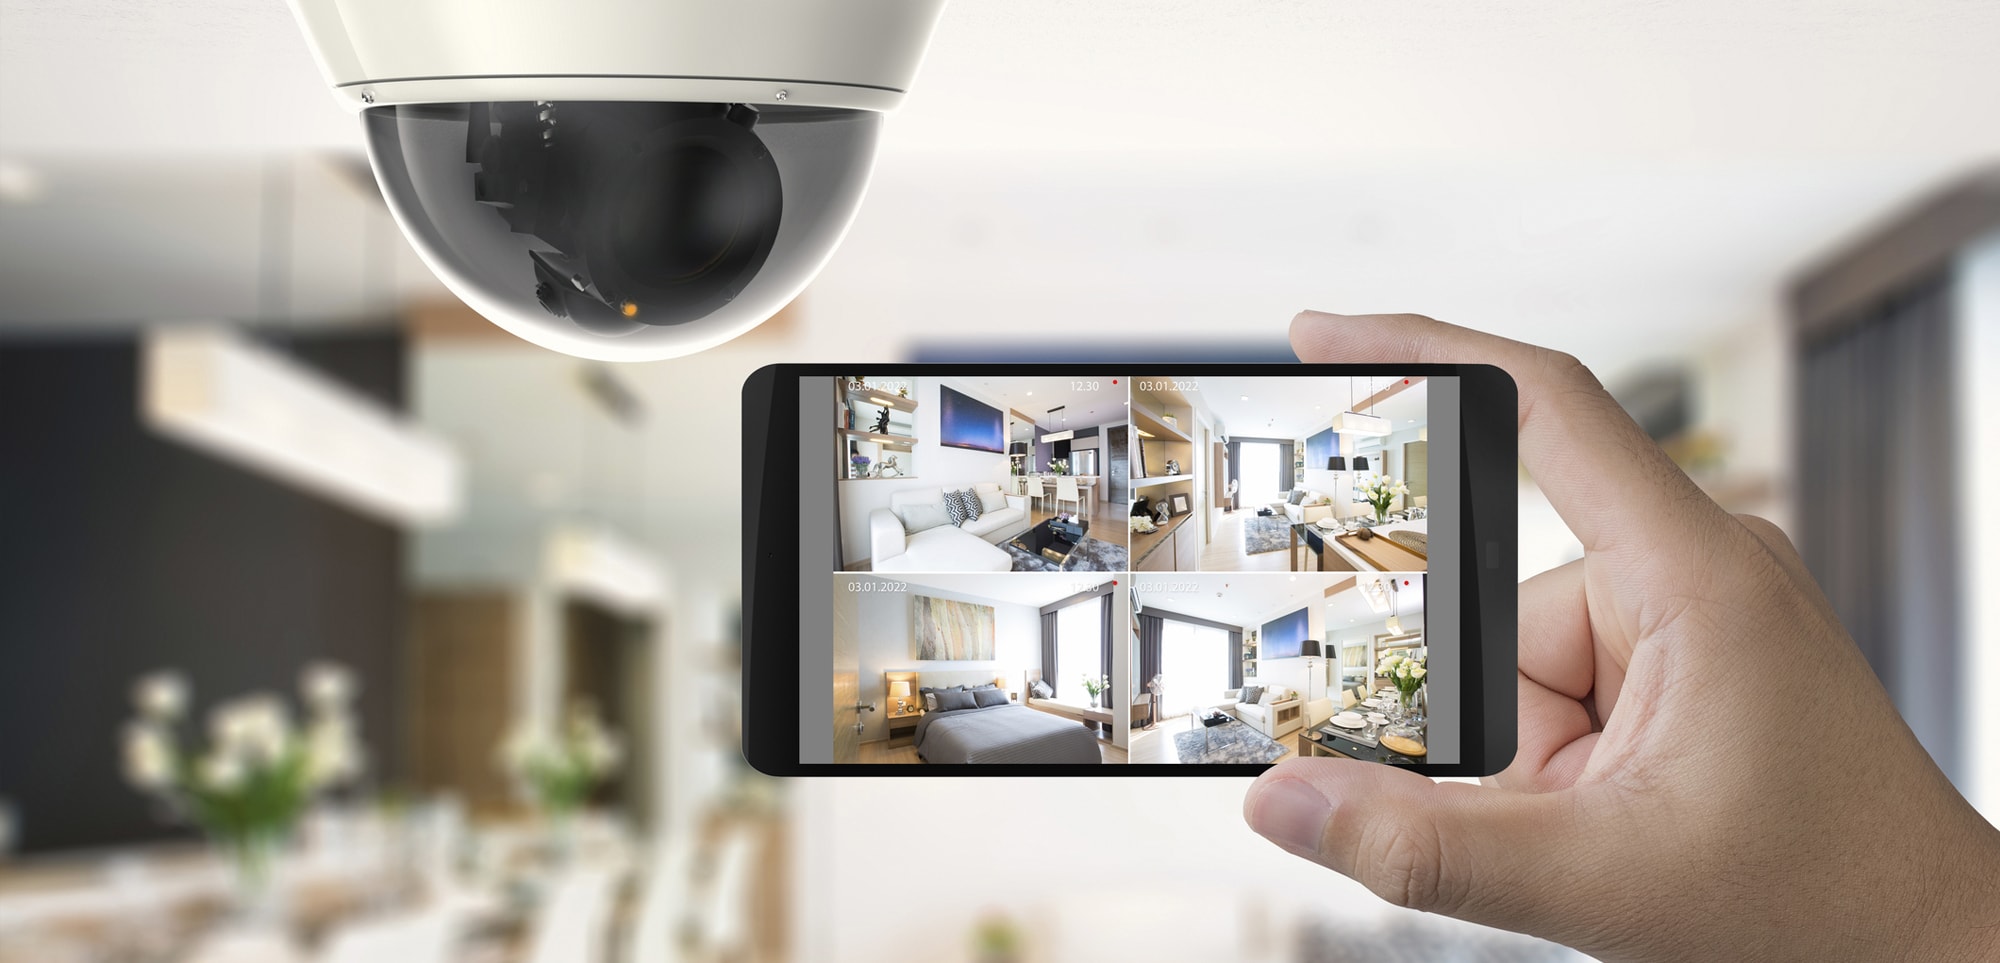 home-security Why You Must Invest in Smart Home Technology if you Remodel Your Home